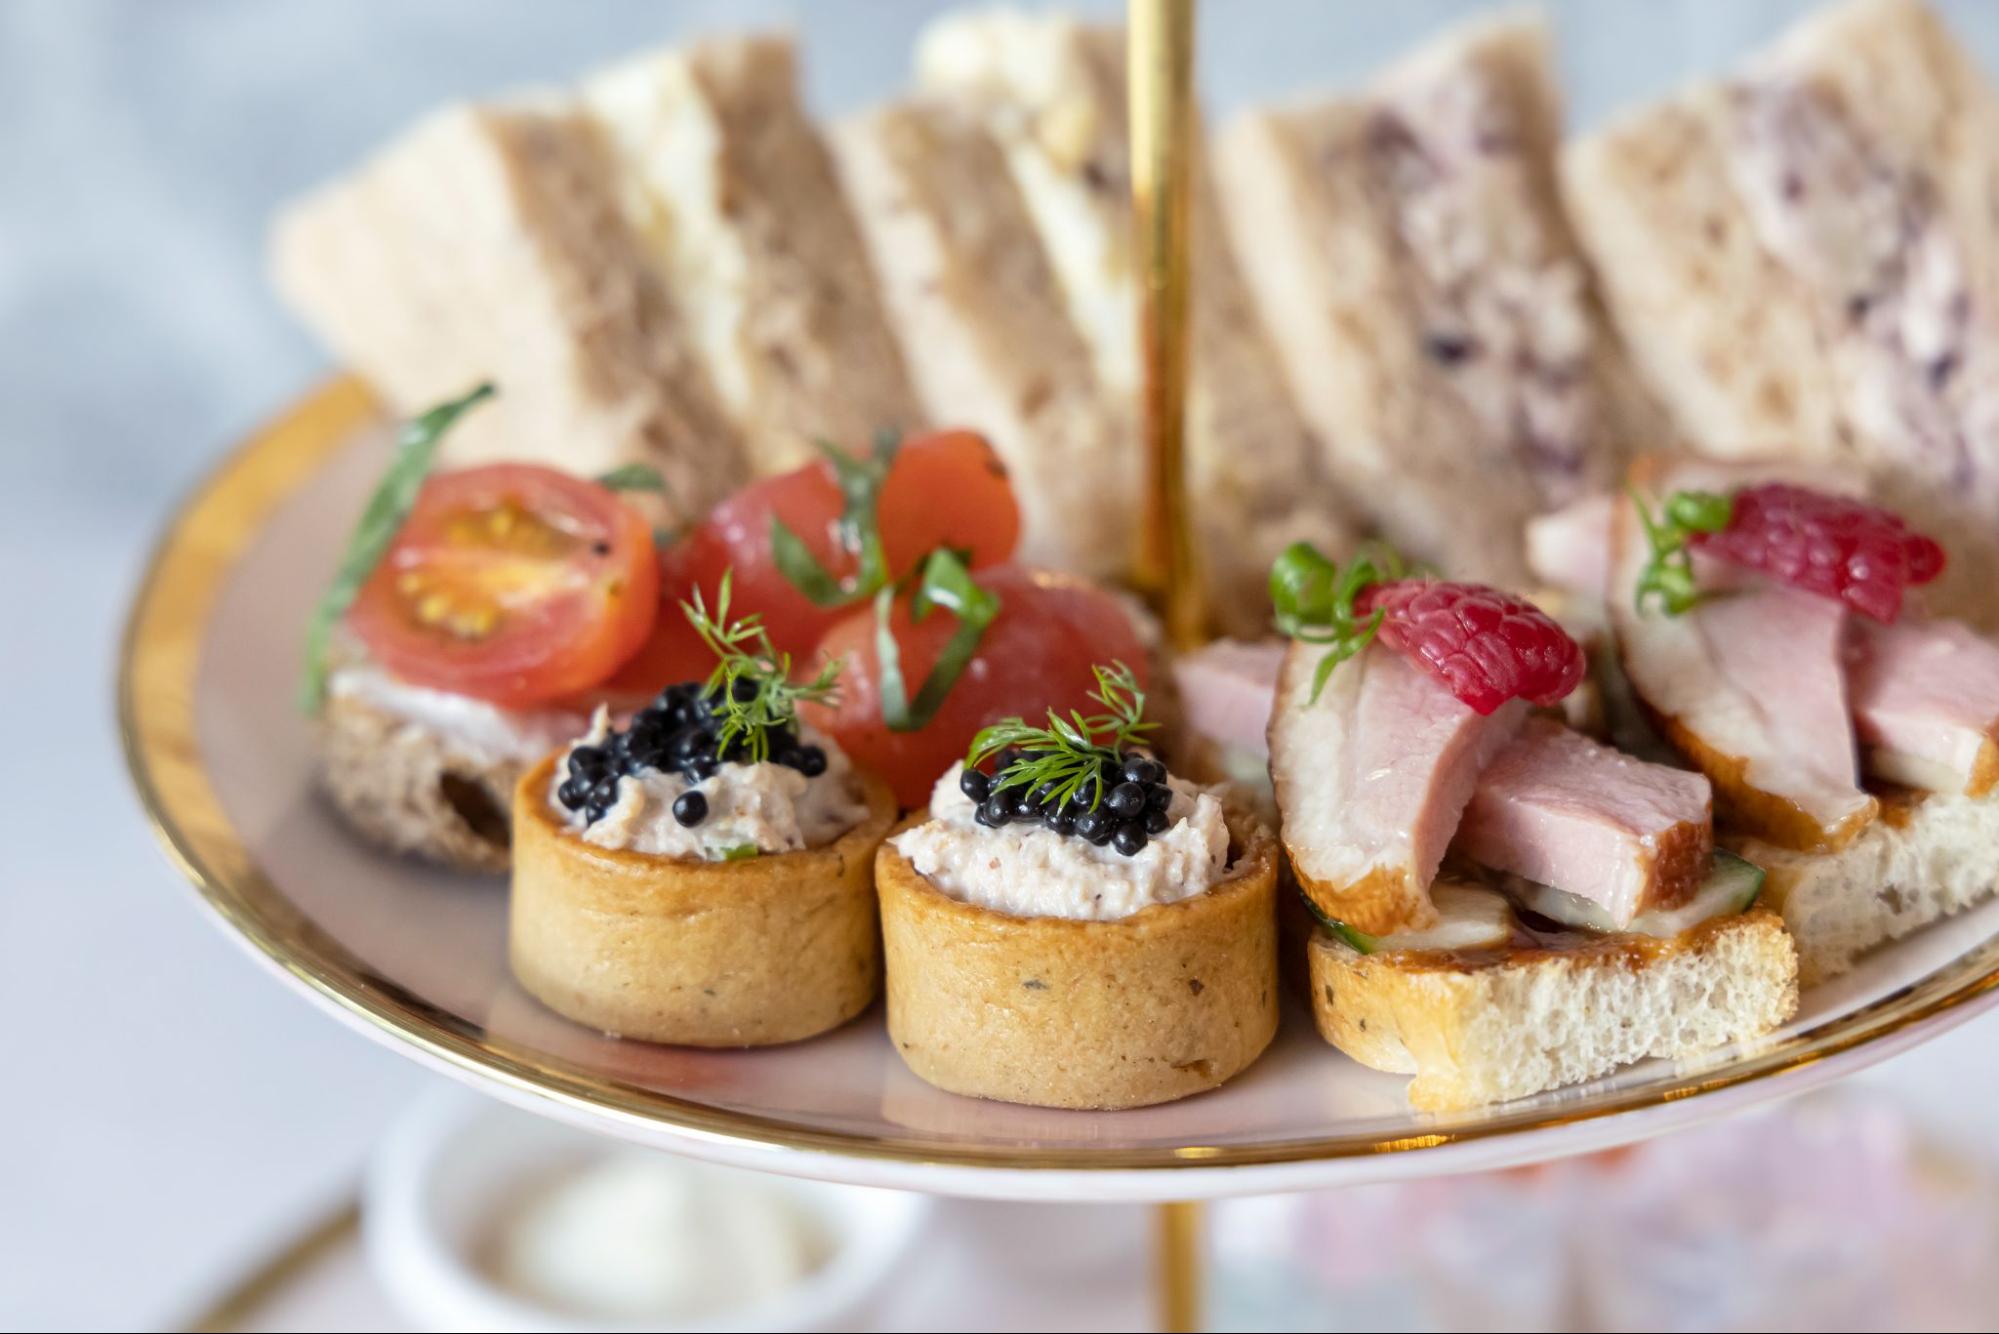 The Marmalade Pantry Bejewelled Afternoon Tea